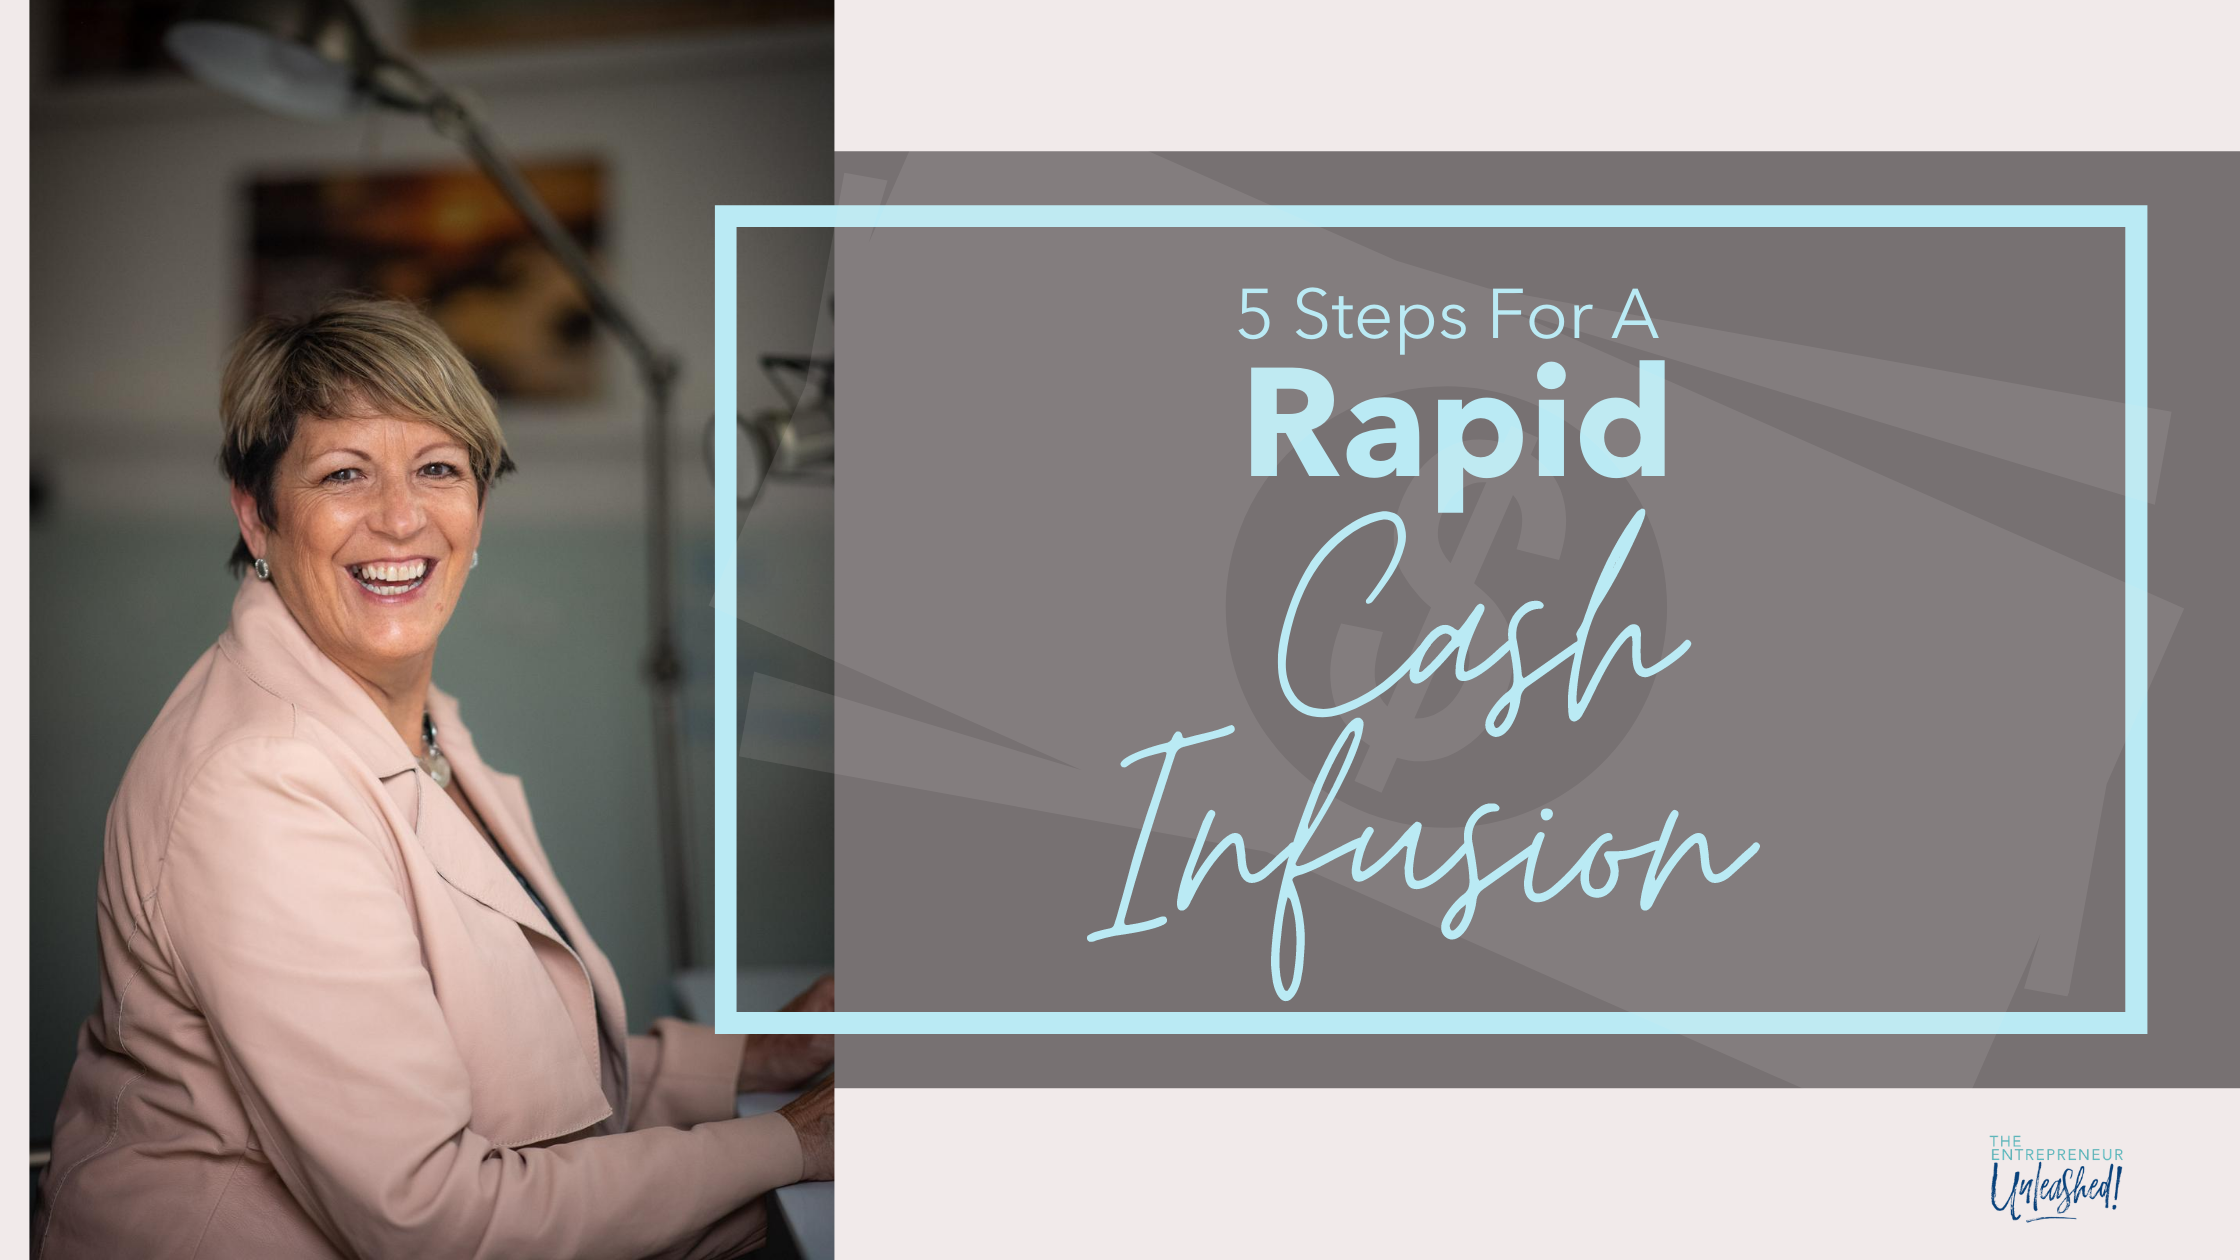 5 Steps For A Rapid Cash Infusion - Patti Keating